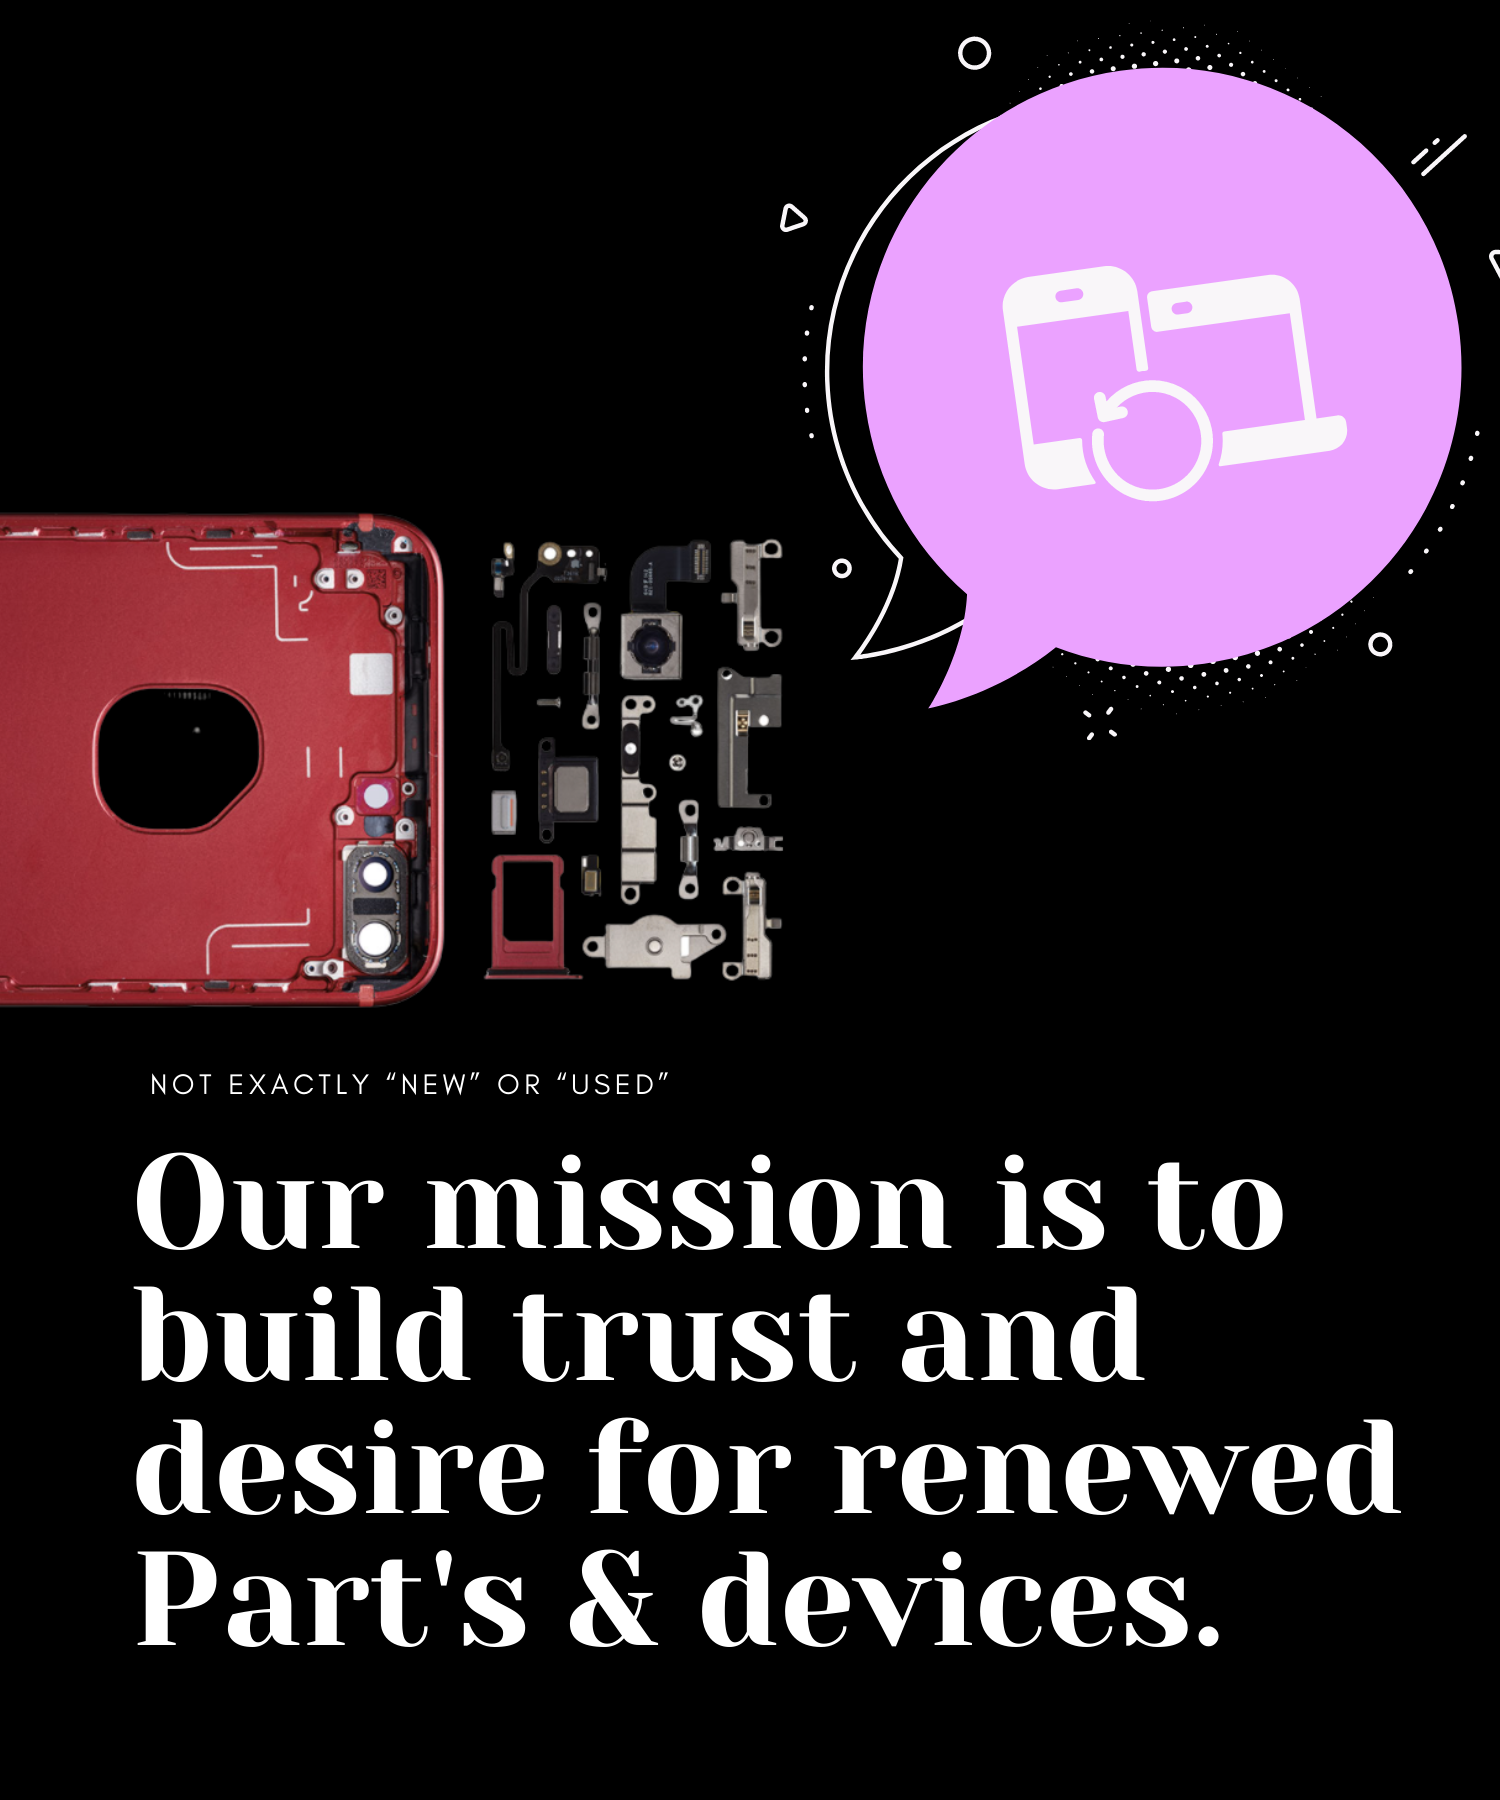 Our mission is to build trust for renewed parts & devices